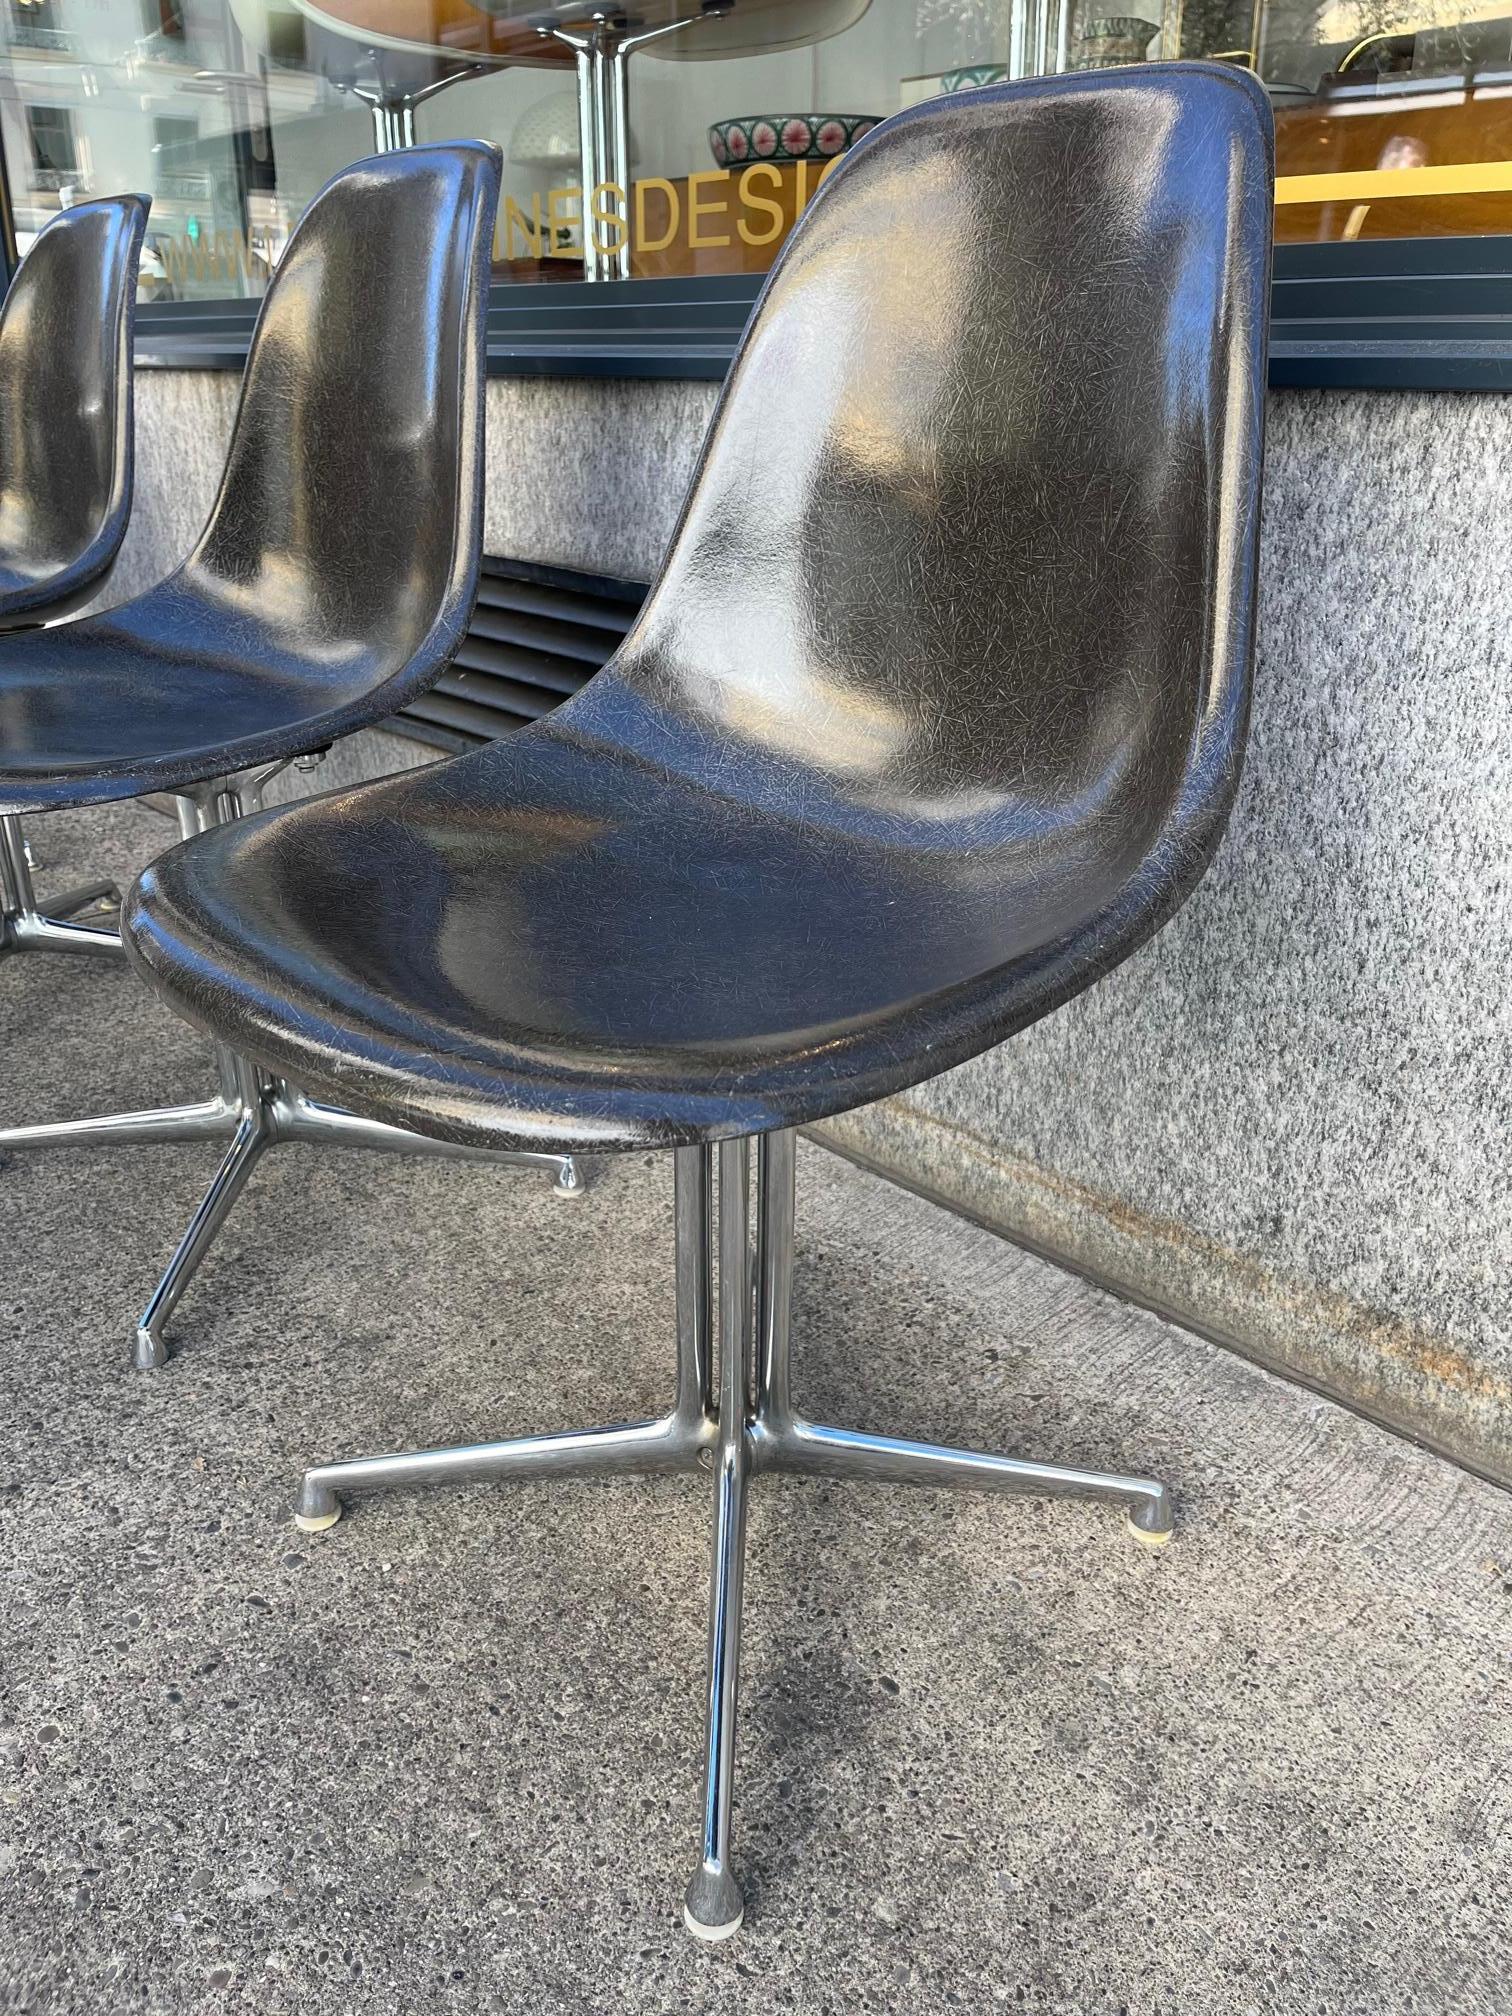 Set of 6 La Fonda dark grey fiberglass side chair by Charles & Ray Eames produced by Herman Miller / Vitra 1978
La Fonda steel base
Very good condition
2 more identical chairs available
Signed engraved.
Price is per set of 6